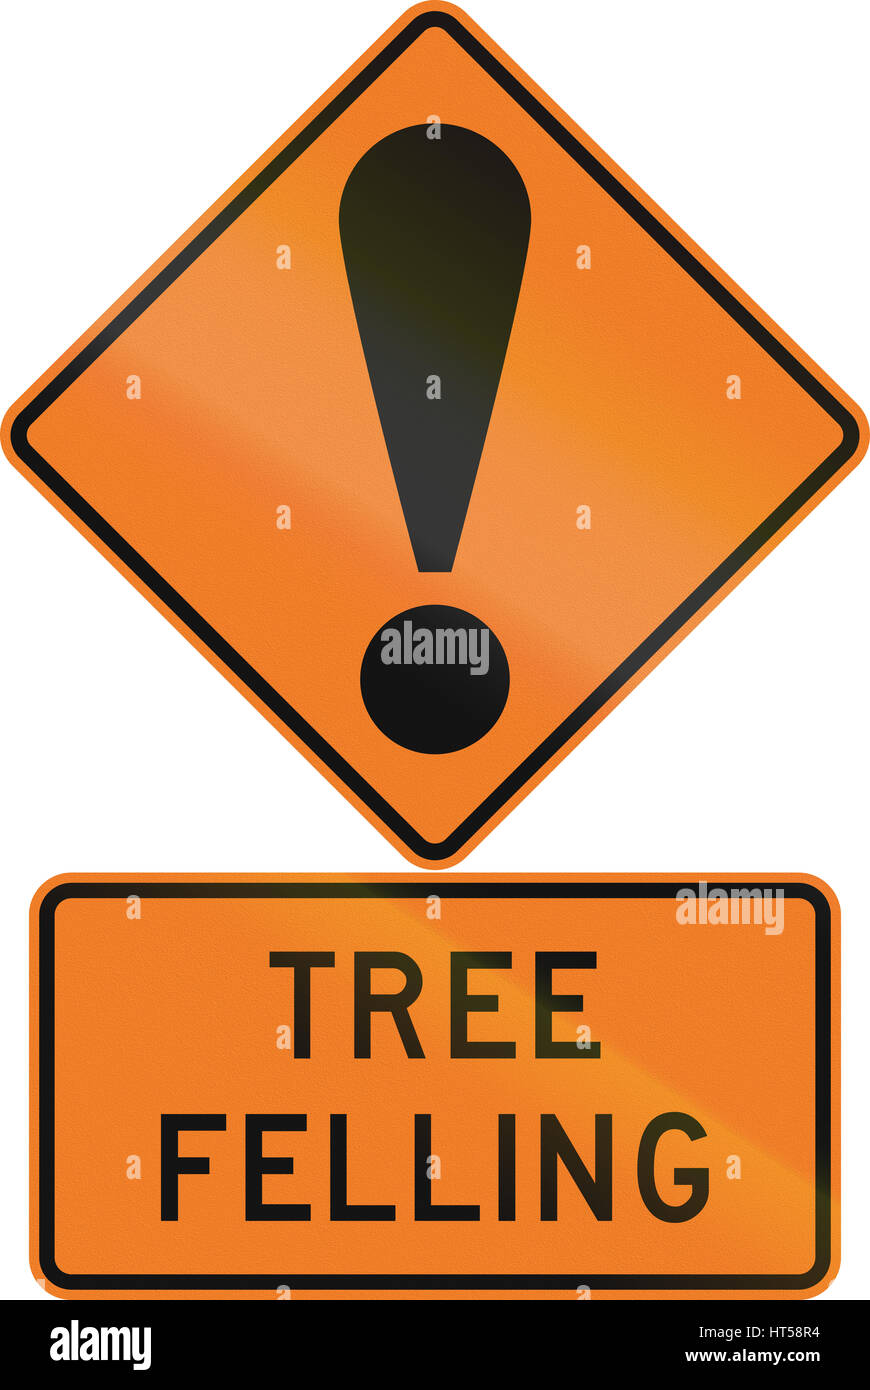 Road sign assembly in New Zealand - Tree felling. Stock Photo